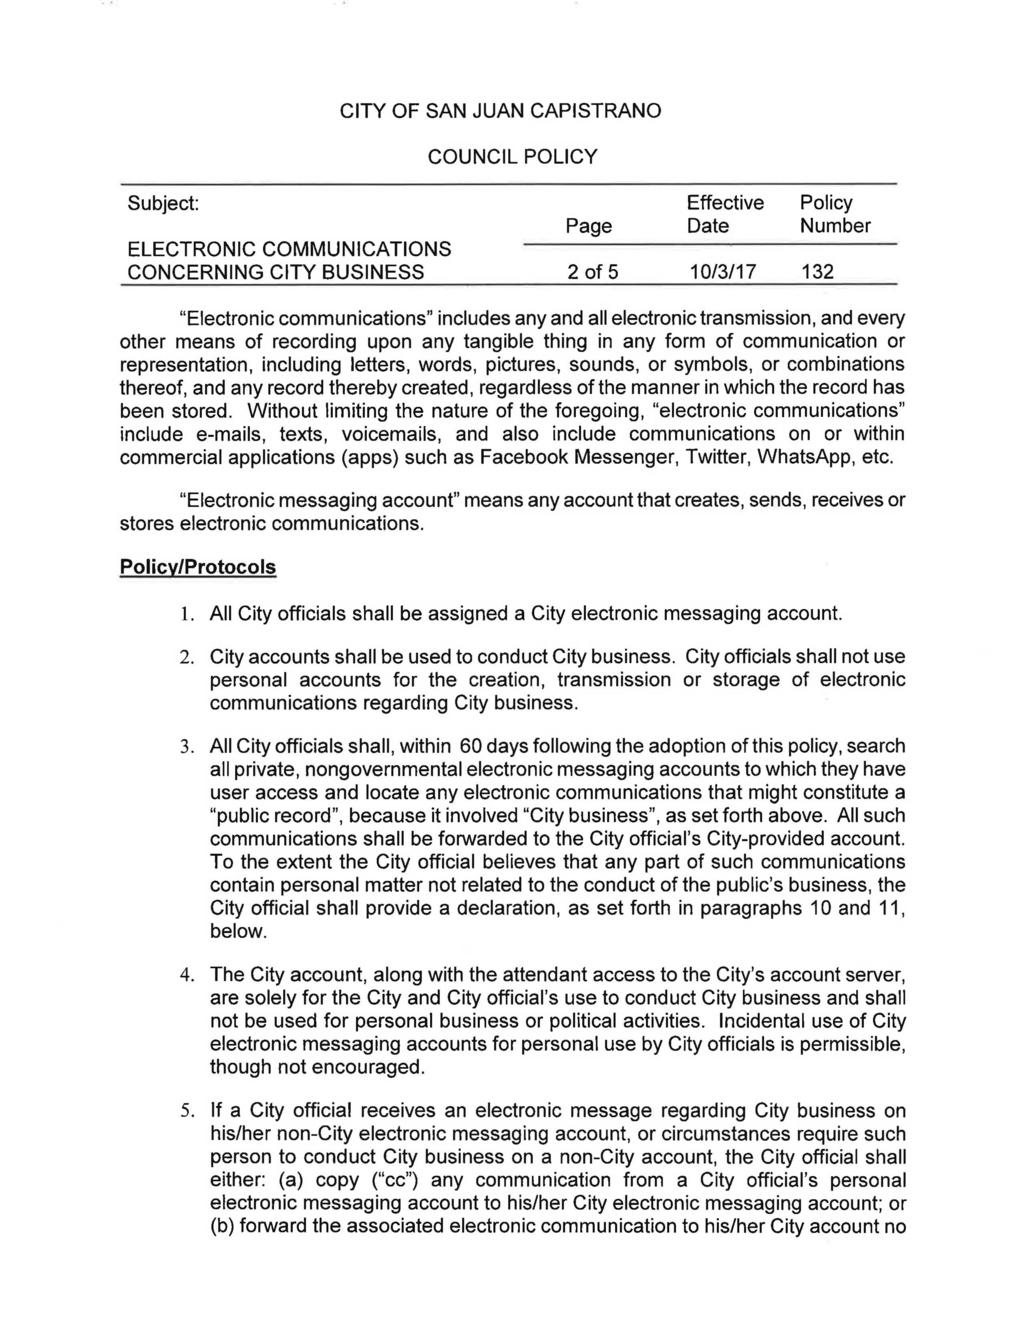 CITY OF SAN JUAN CAPISTRANO COUNCIL POLICY Subject: ELECTRONIC COMMUNICATIONS CONCERNING CITY BUSINESS Page 2 of 5 Effective Date 10/3/17 Policy Number 132 "Electronic communications" includes any